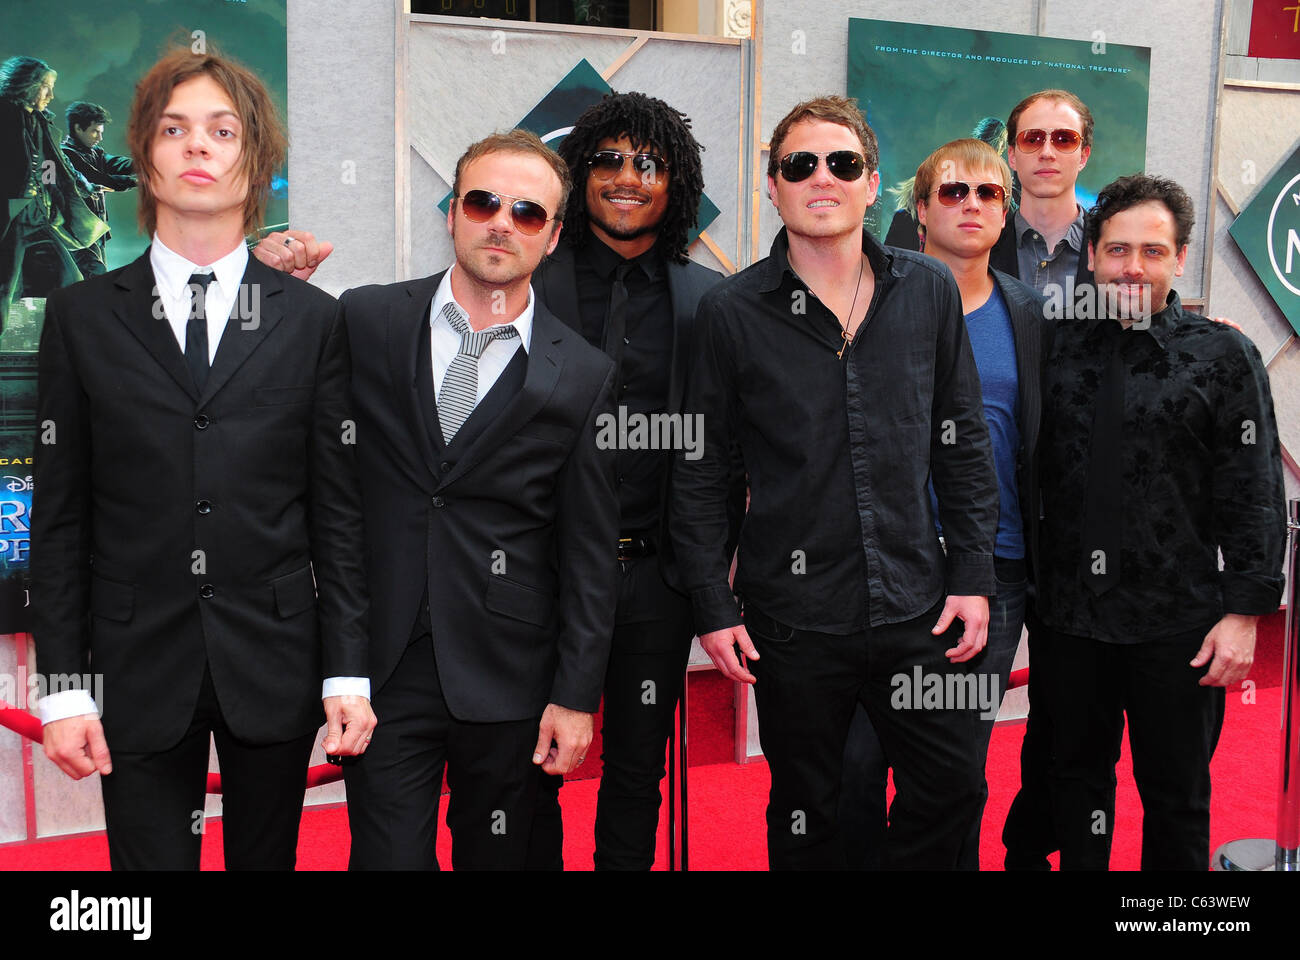 Alpha Rev at arrivals for THE SORCERER'S APPRENTICE Premiere, New Amsterdam Theatre, New York, NY July 6, 2010. Photo By: Gregorio T. Binuya/Everett Collection Stock Photo